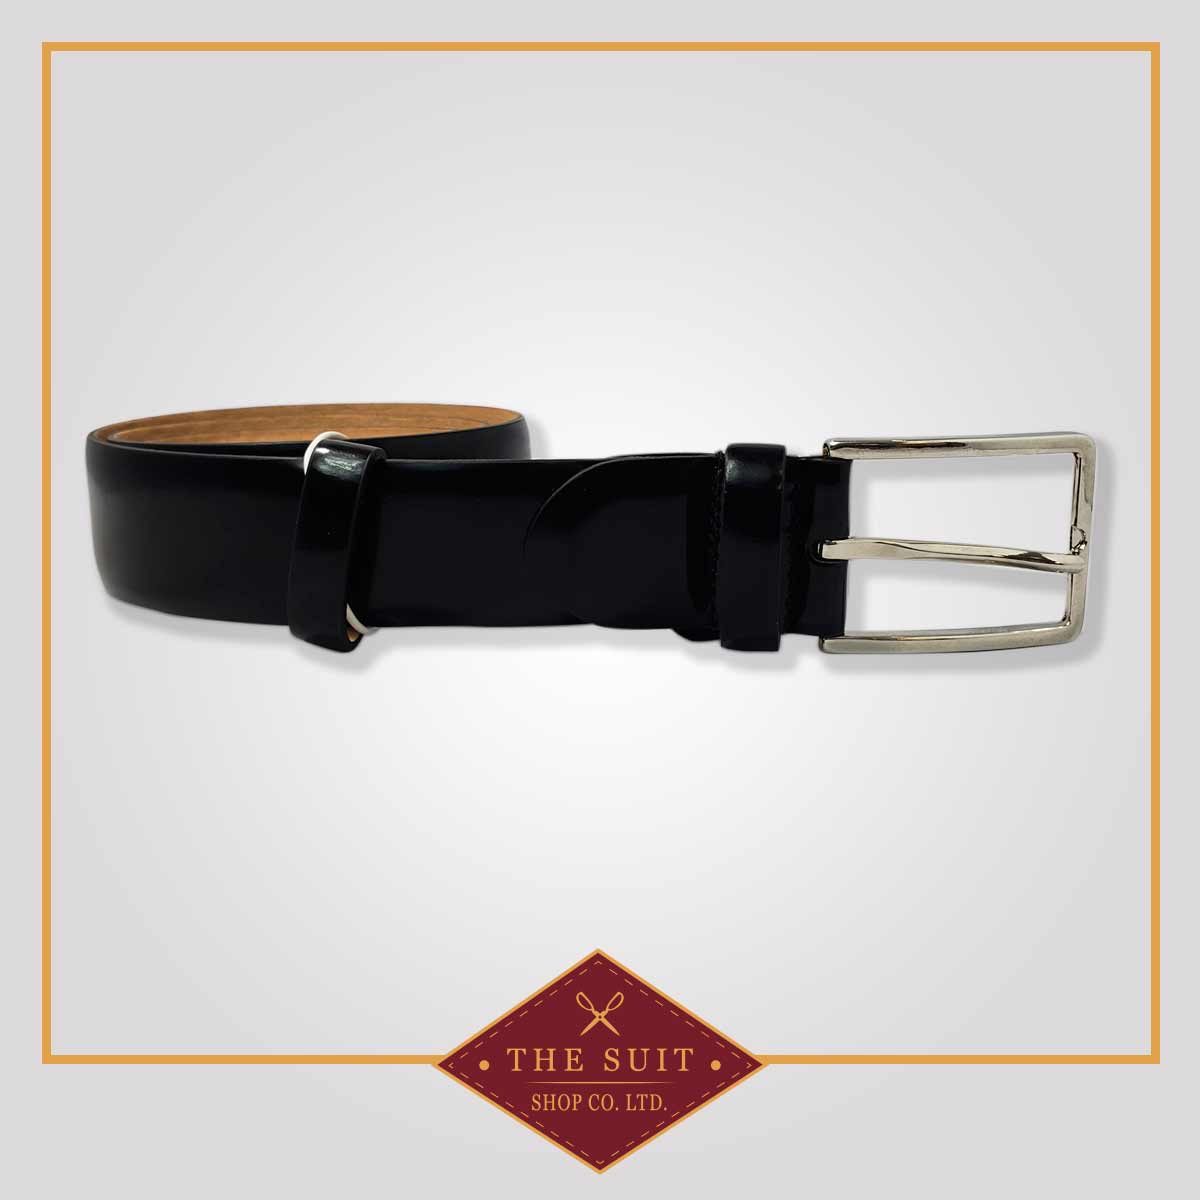 Black Formal Leather Belt Smooth with no edge stitch